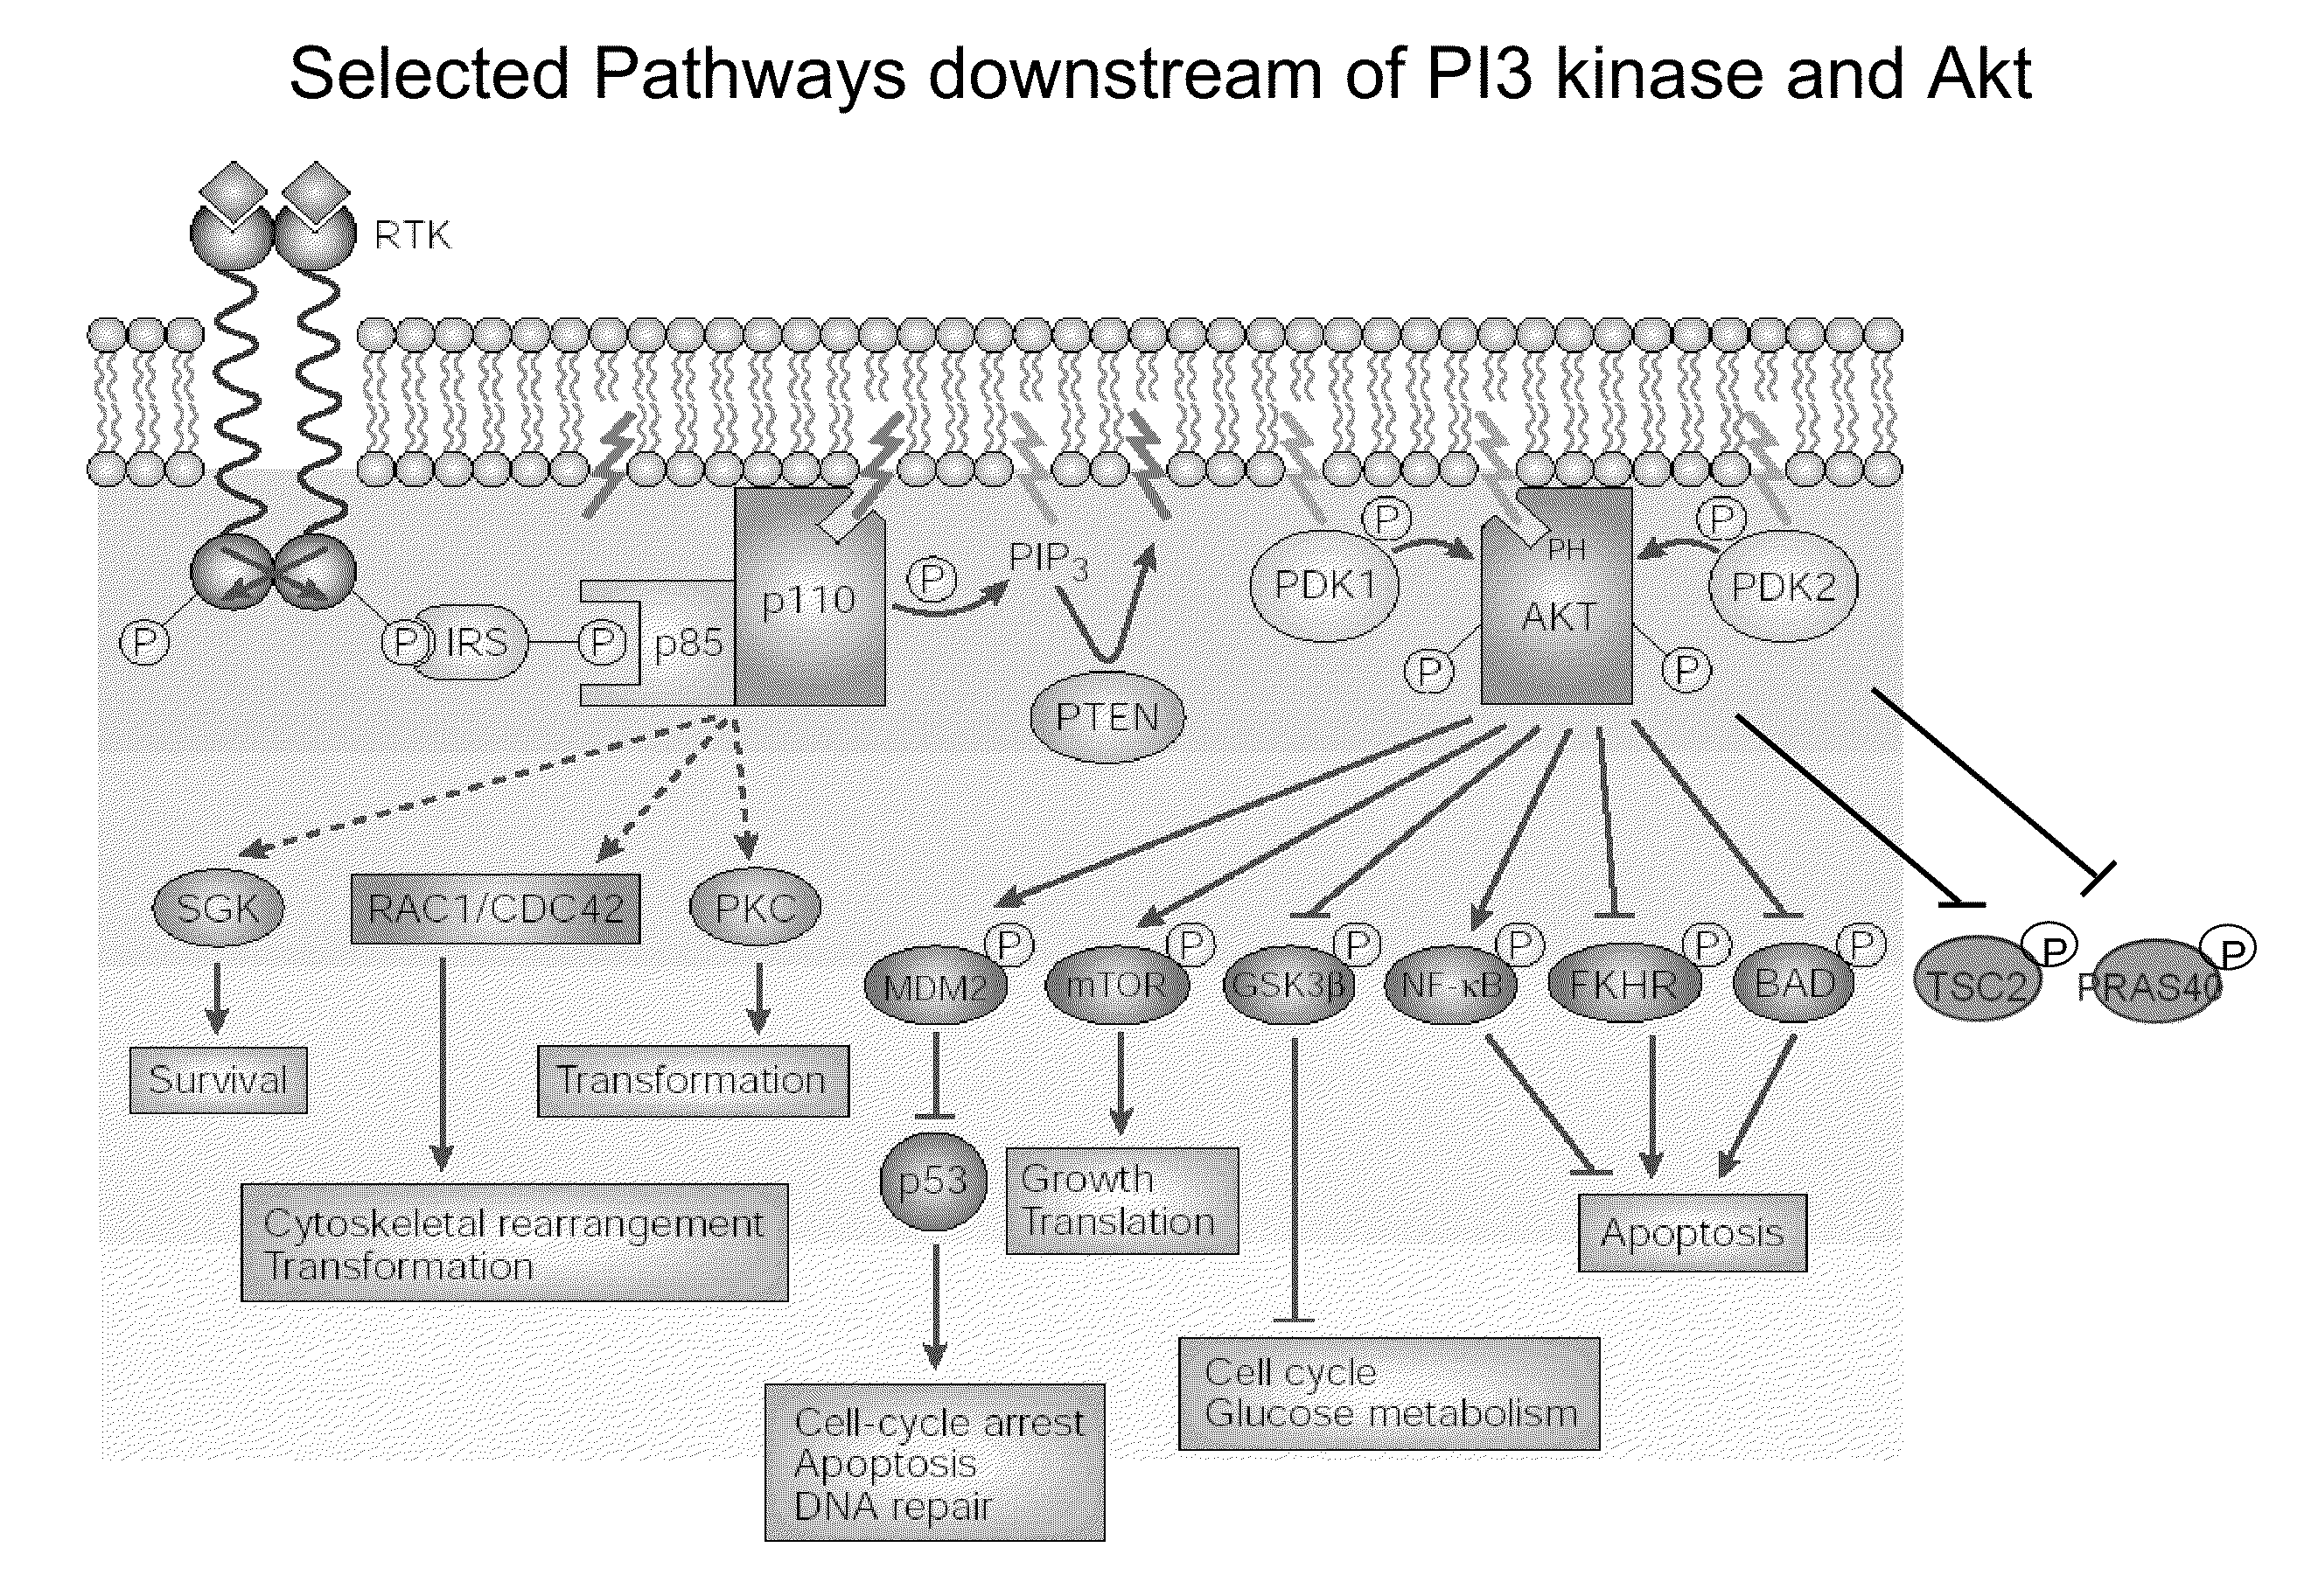 Multiple mechanisms for modulation of the pi3 kinase pathway